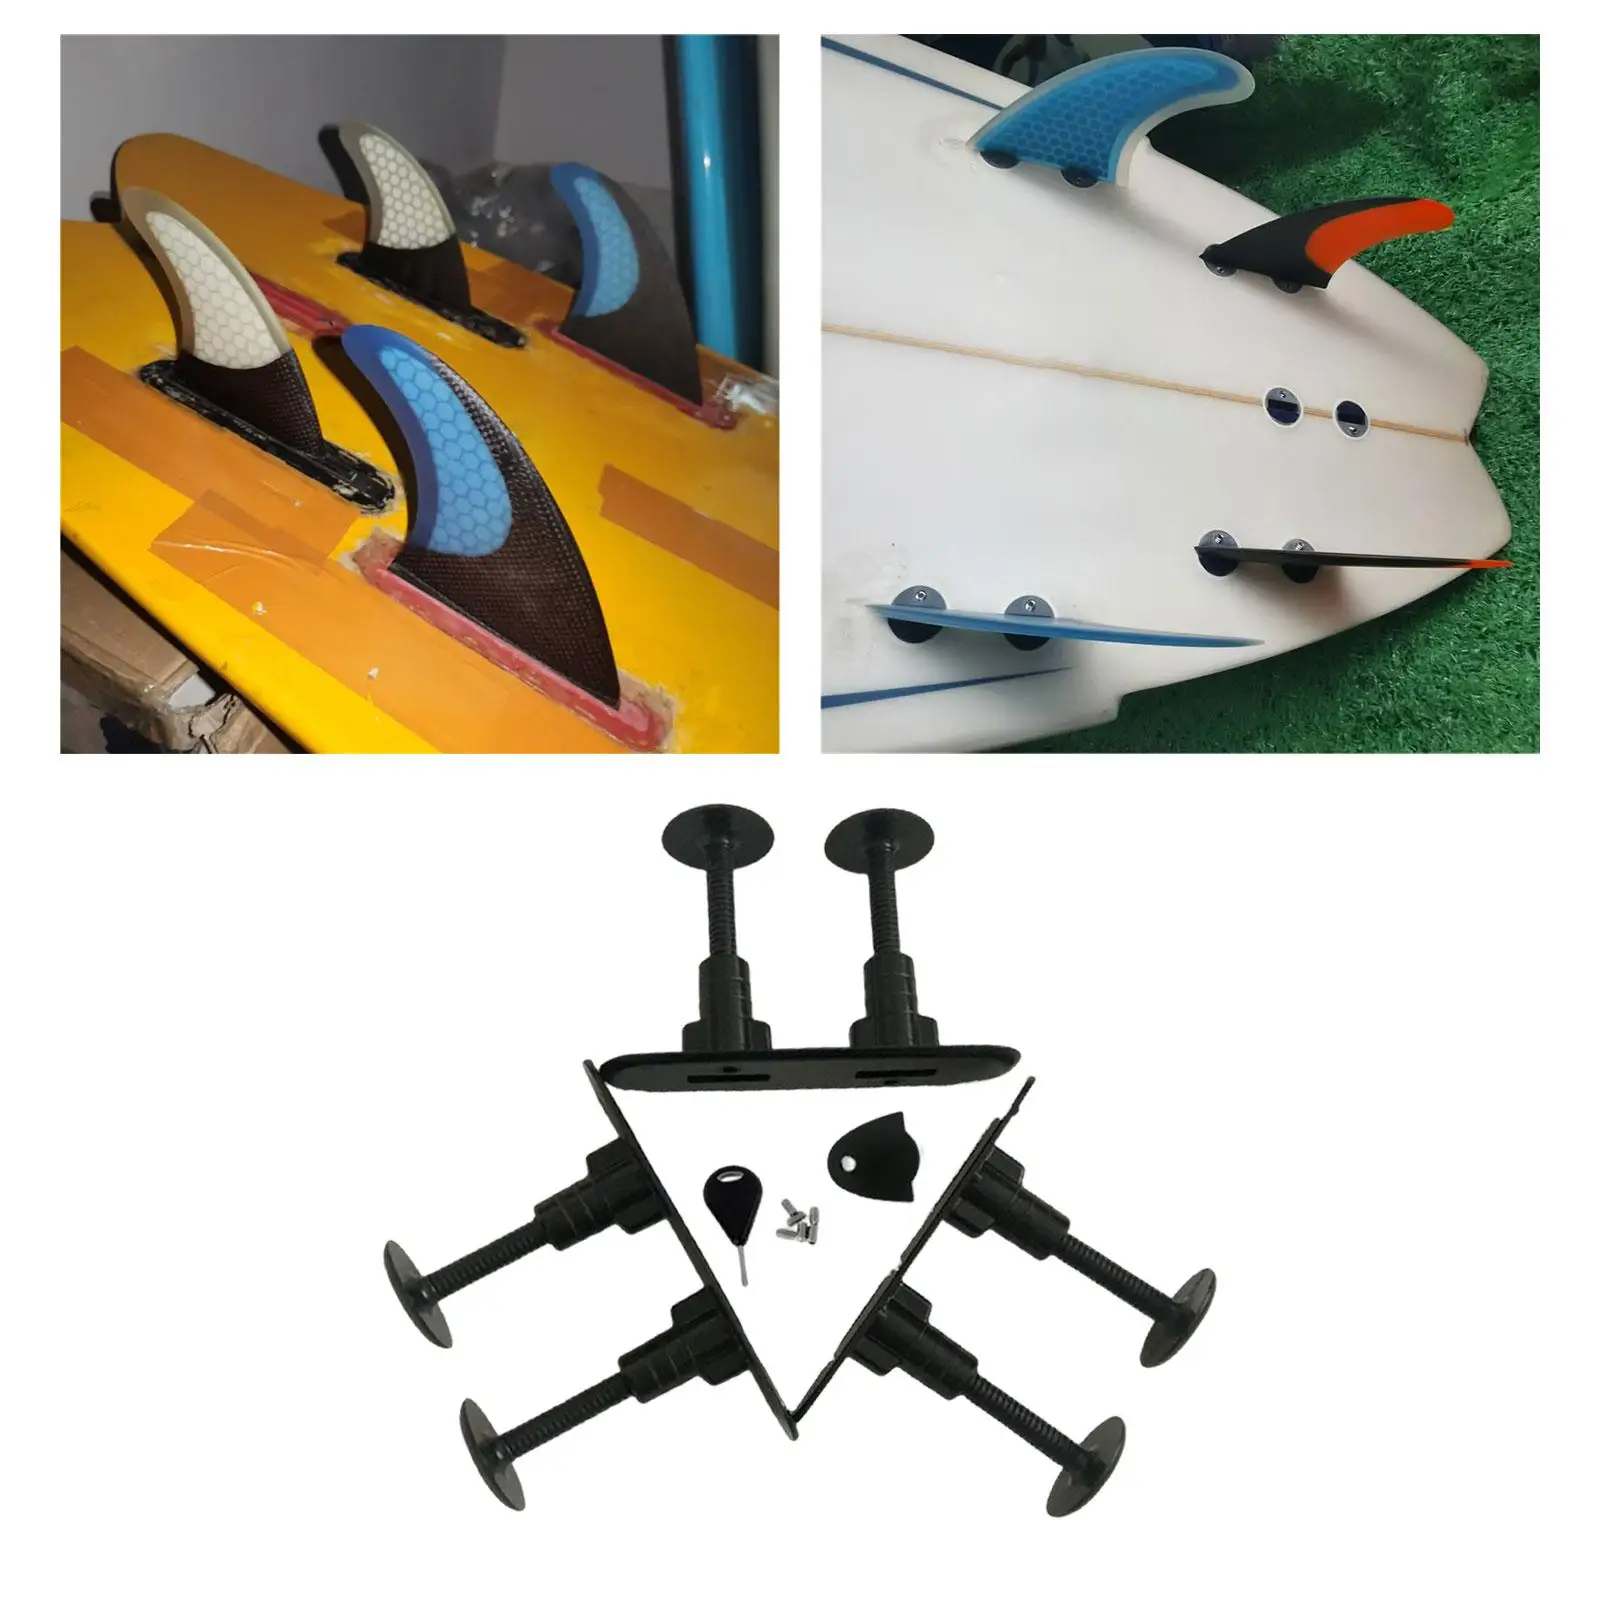 3 Pieces Surfboard Fin Plugs Install Base with Key and Screws Soft Top Soft Plug Black PVC Surfboard Accessories Paddleboard